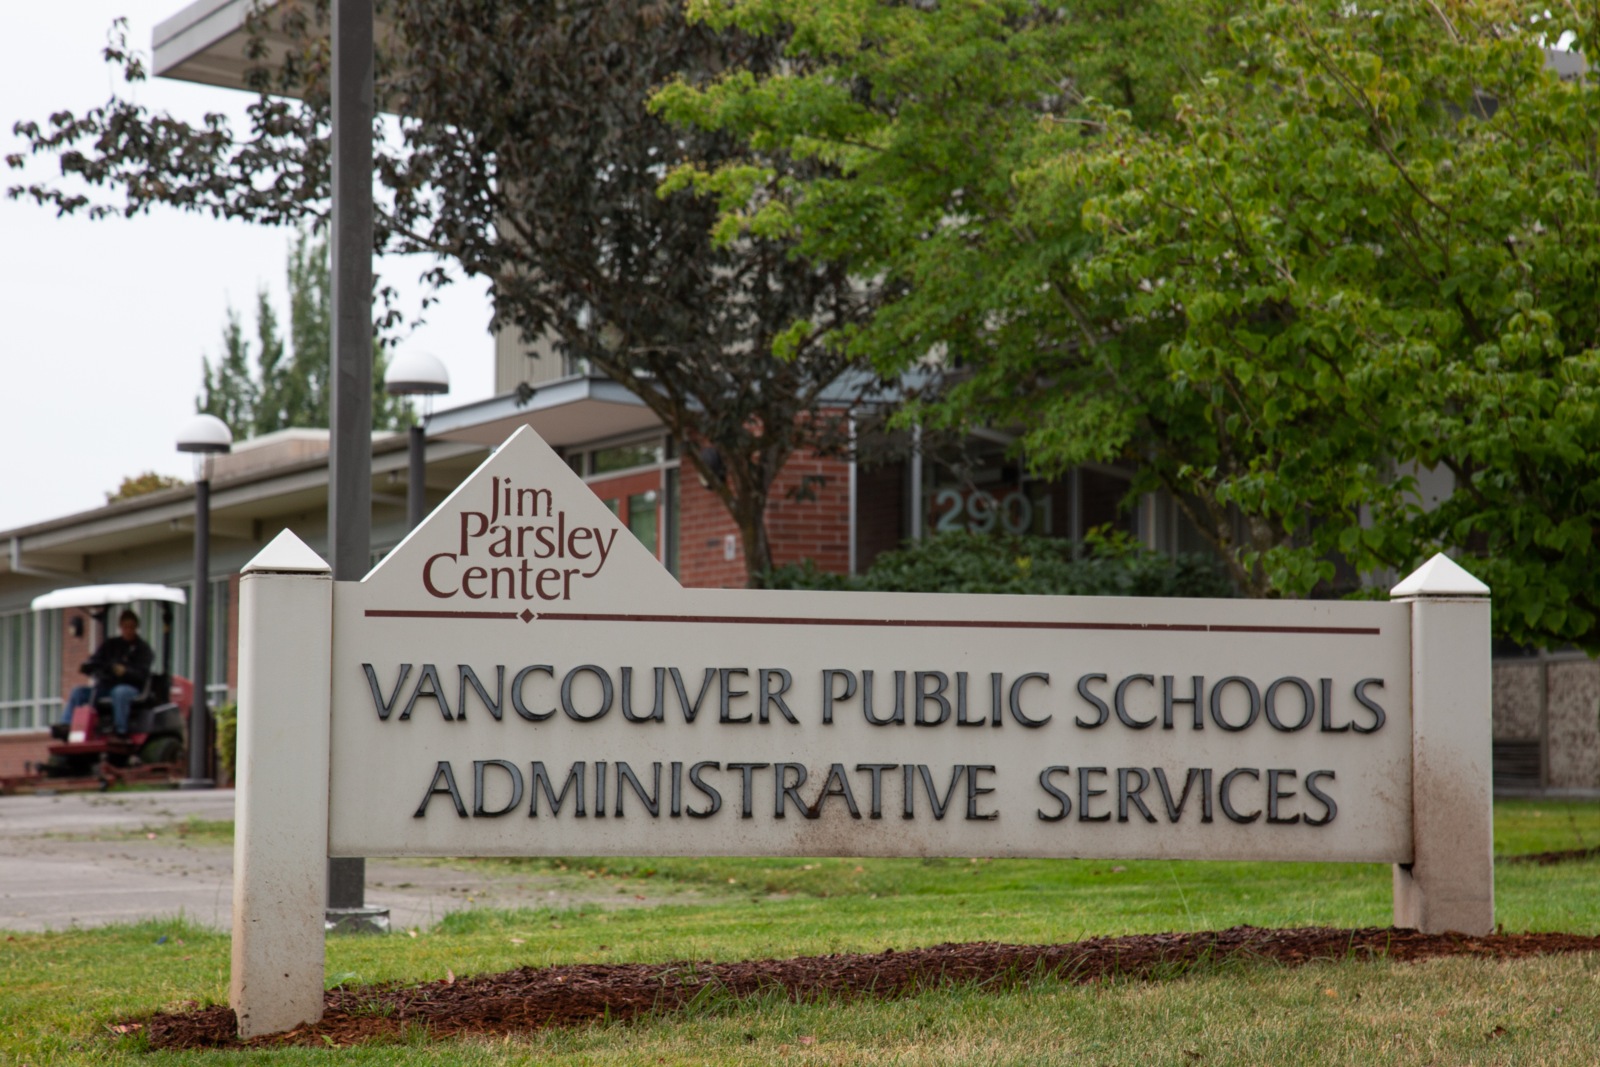 Vancouver Public Schools continued to use prohibited restraints on students after state ban